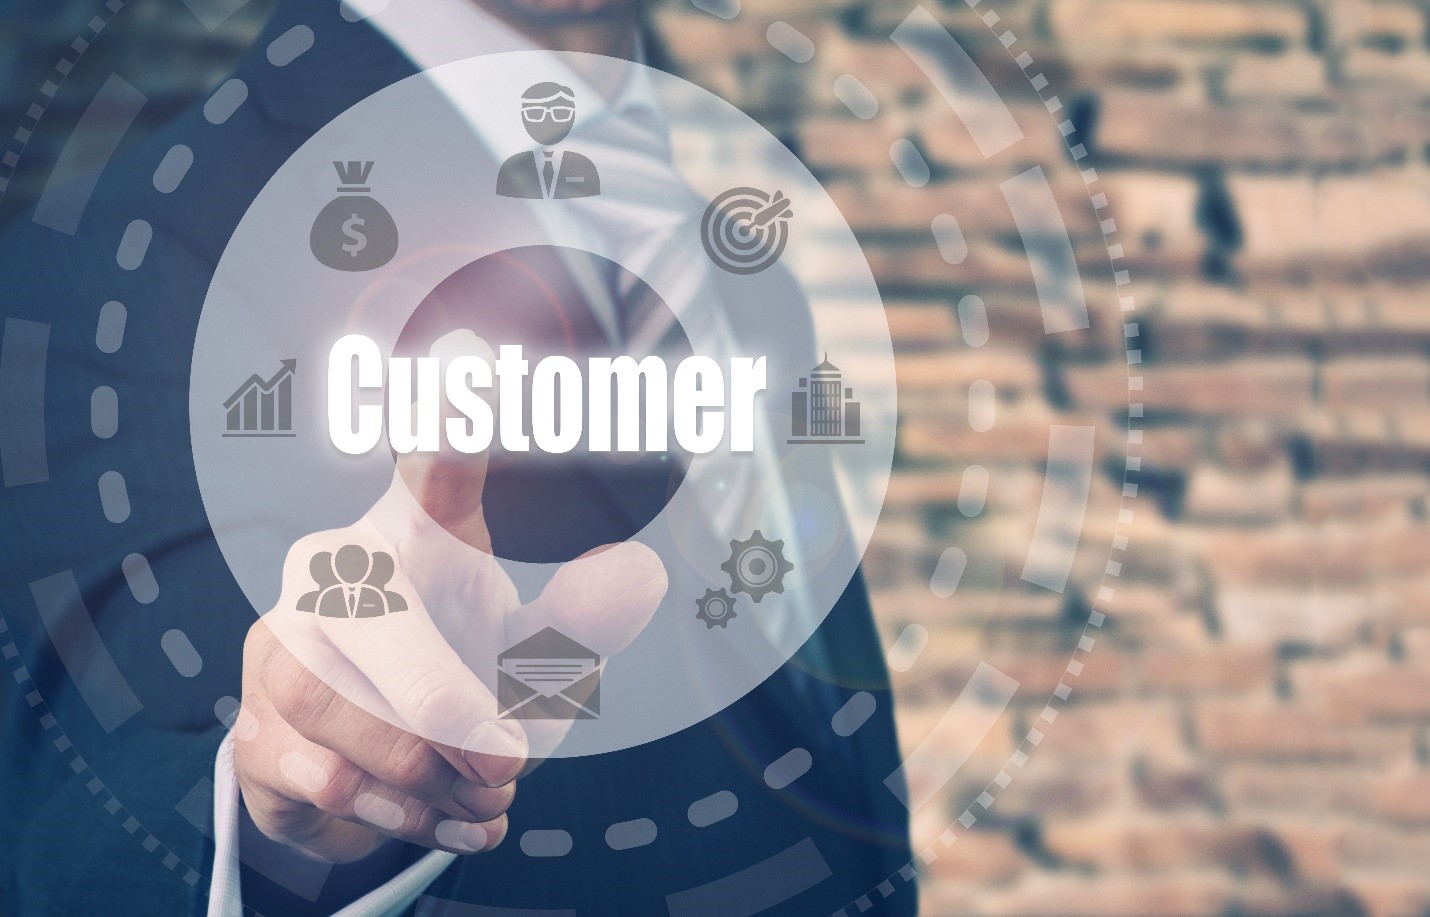 Has Your Business Defined Customer Experience Correctly?